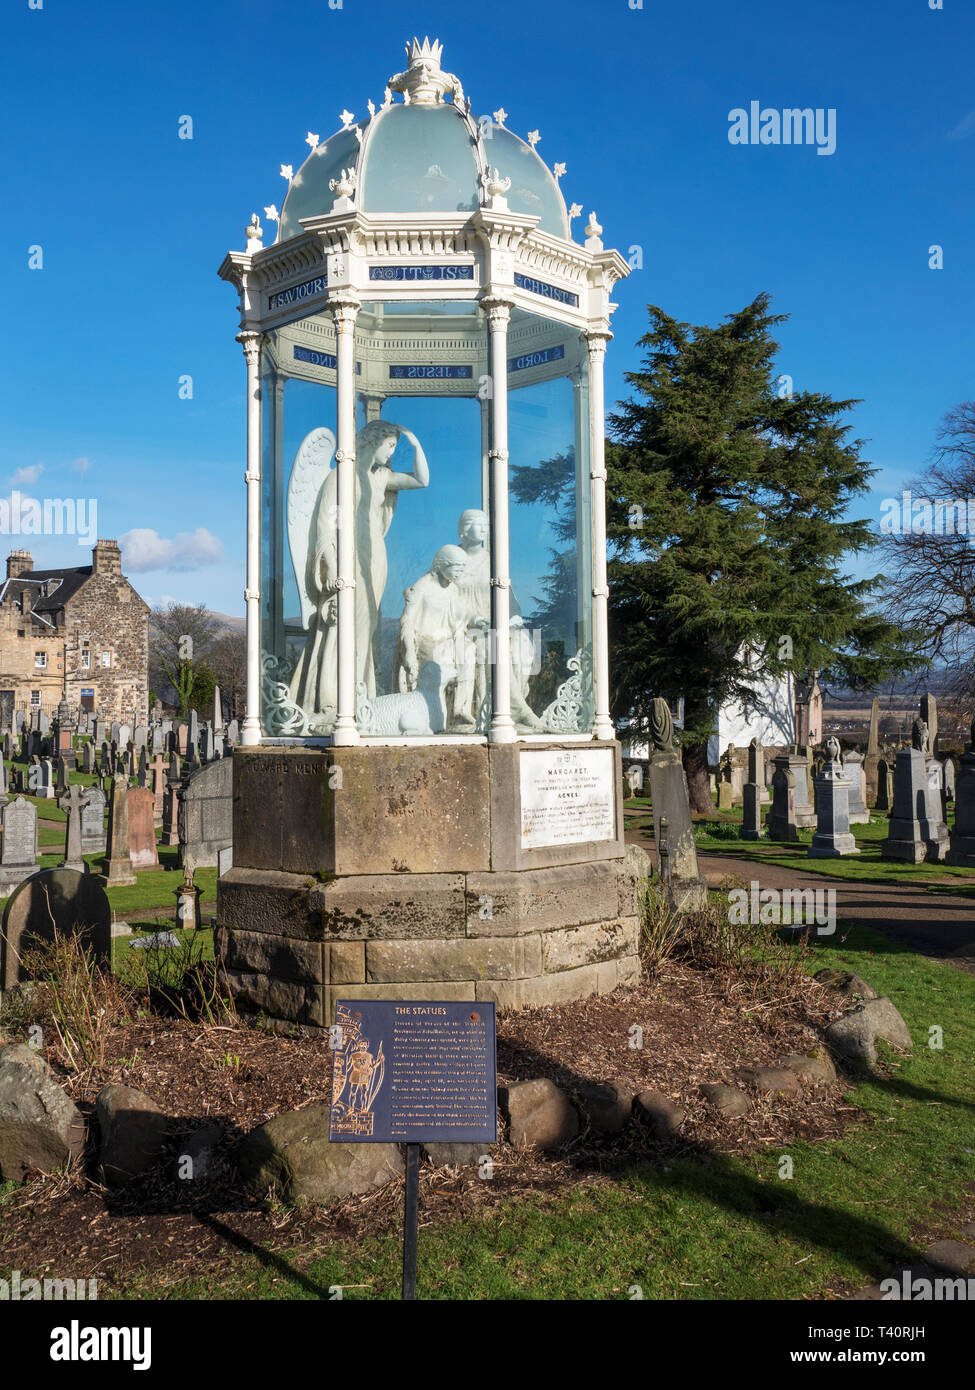 The Martyrs Monument marble group by Handyside Ritchie in the Old Town Cemetery City of Stirling Scotland Stock Photo